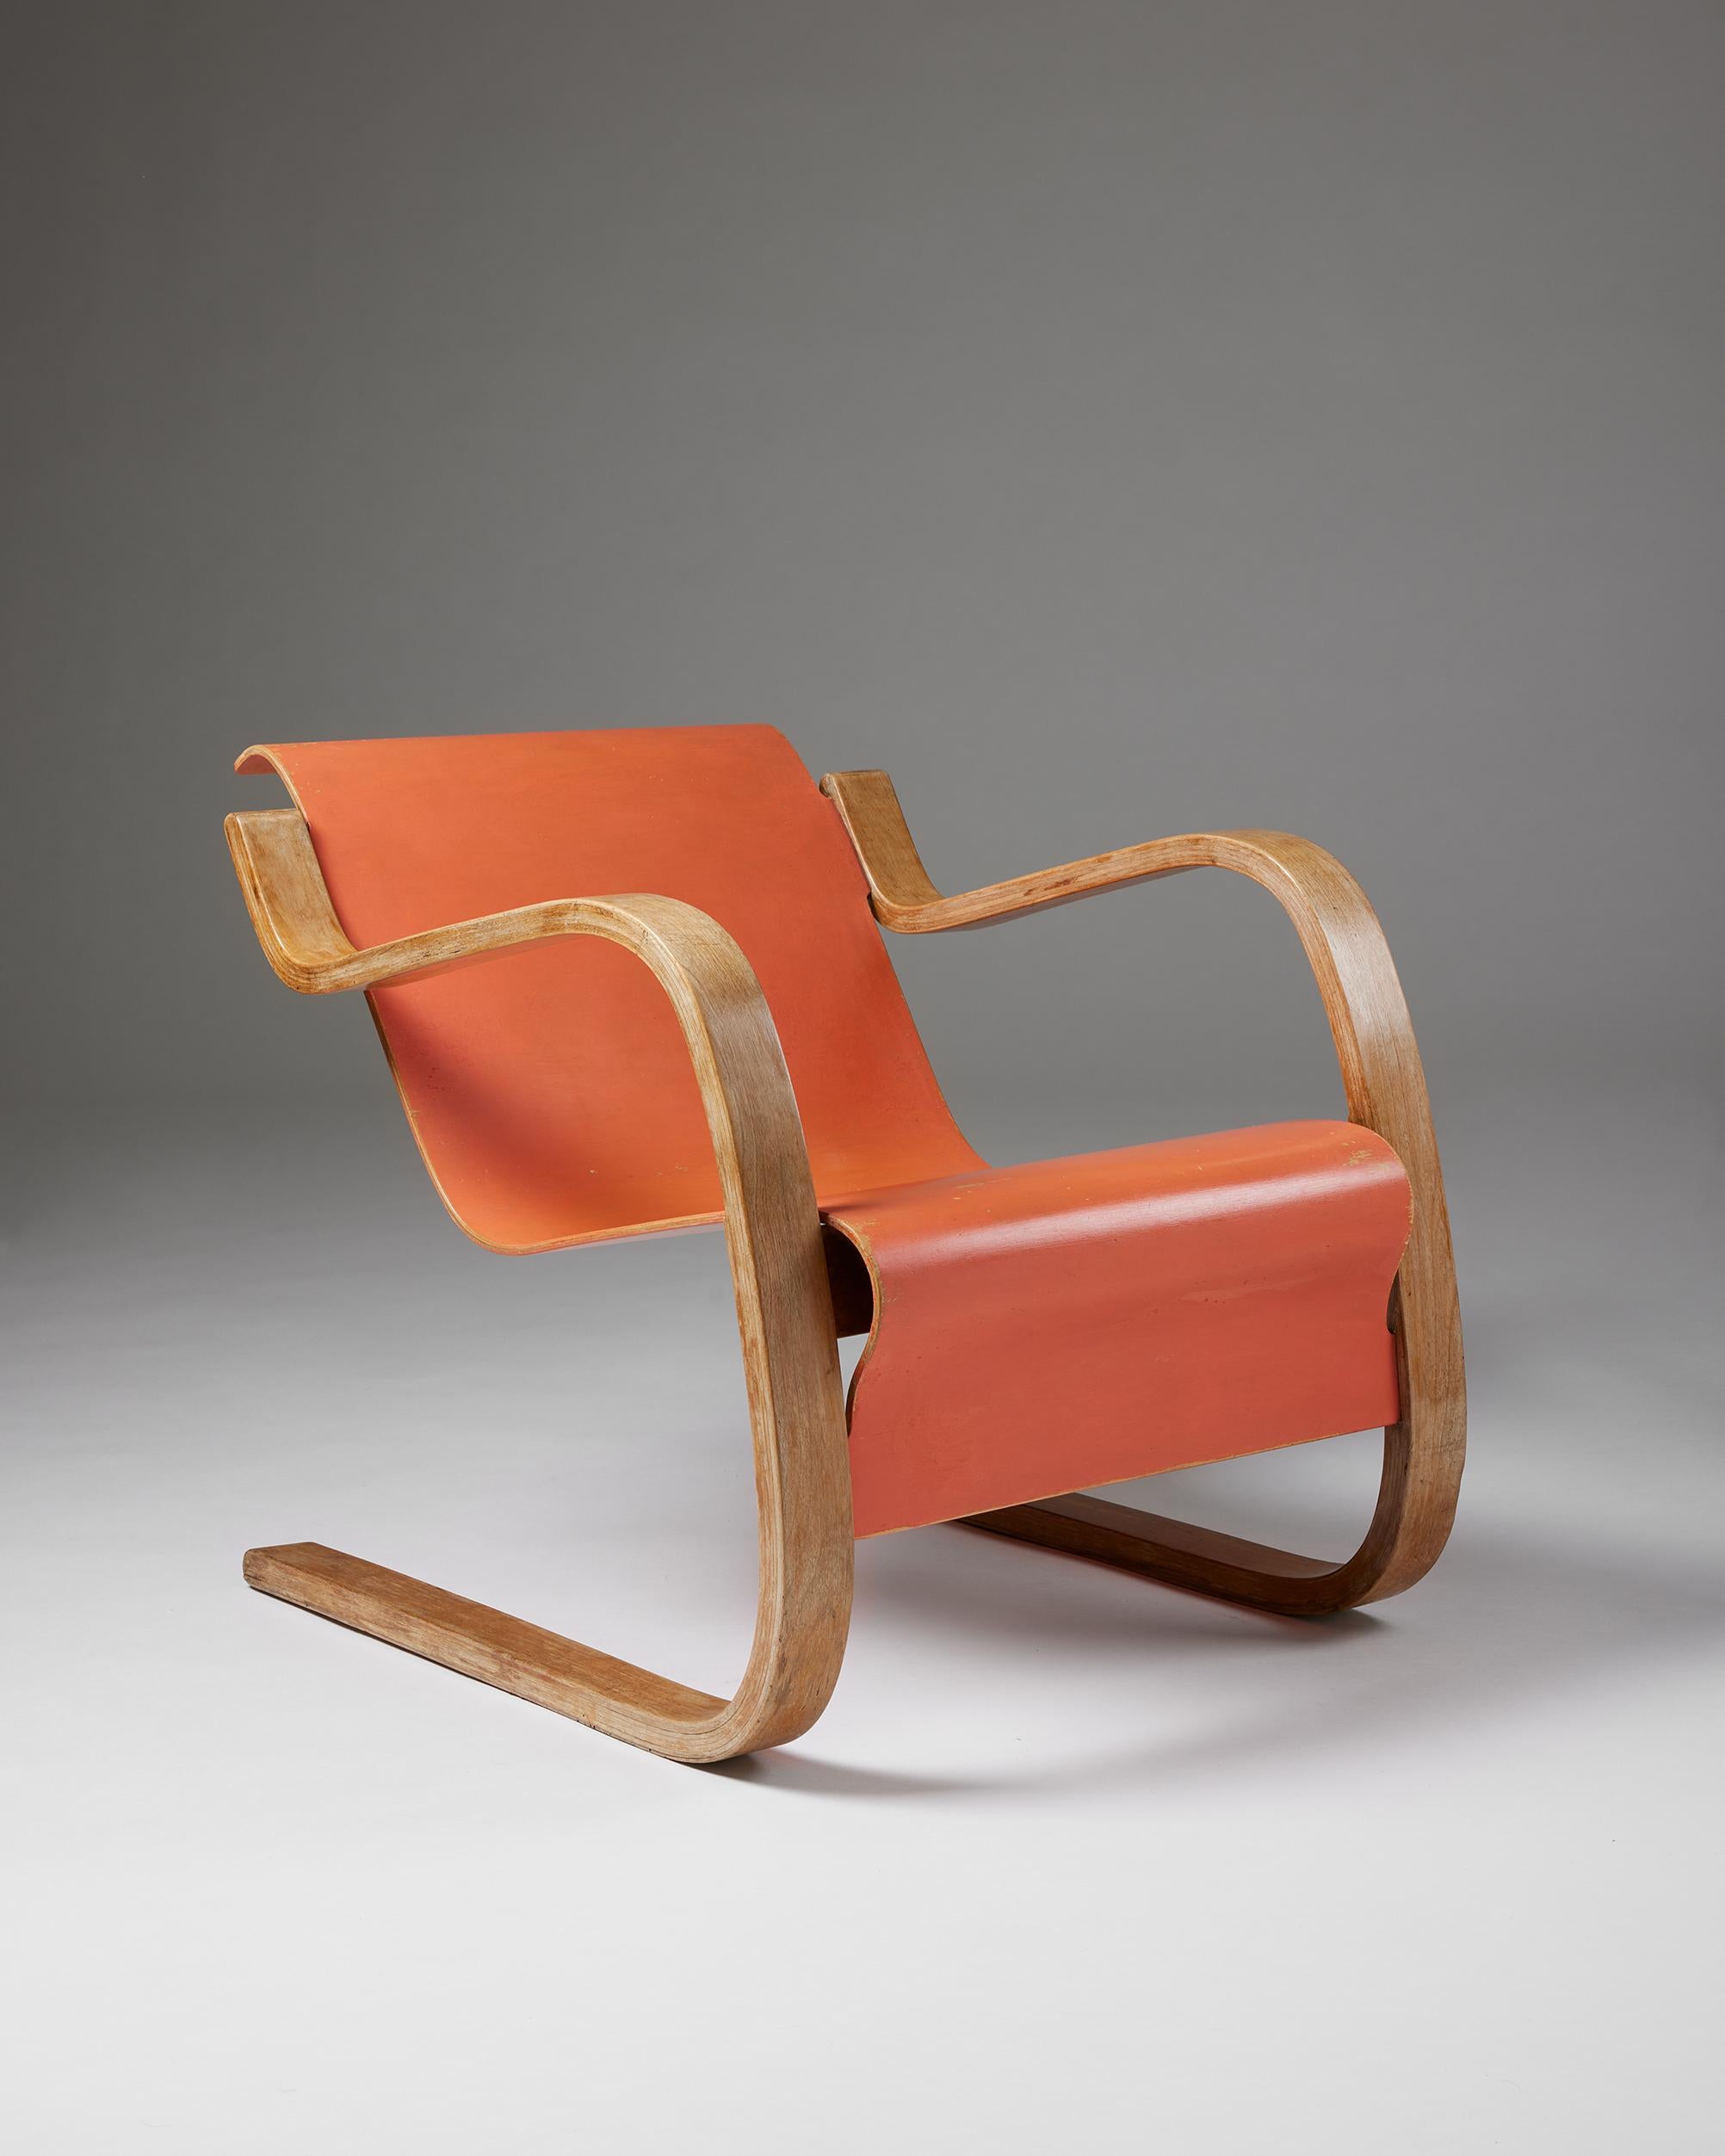 Rare armchair 'Small Paimio' model 42 designed by Alvar Aalto,
Finland, 1932.

Painted birch veneer and bent plywood.

Stamped.

H: 61.5 cm
W: 60.5 cm
D: 78 cm
SH: 37 cm
AH: 57 cm

Alvar Aalto was a Finnish architect and designer. His